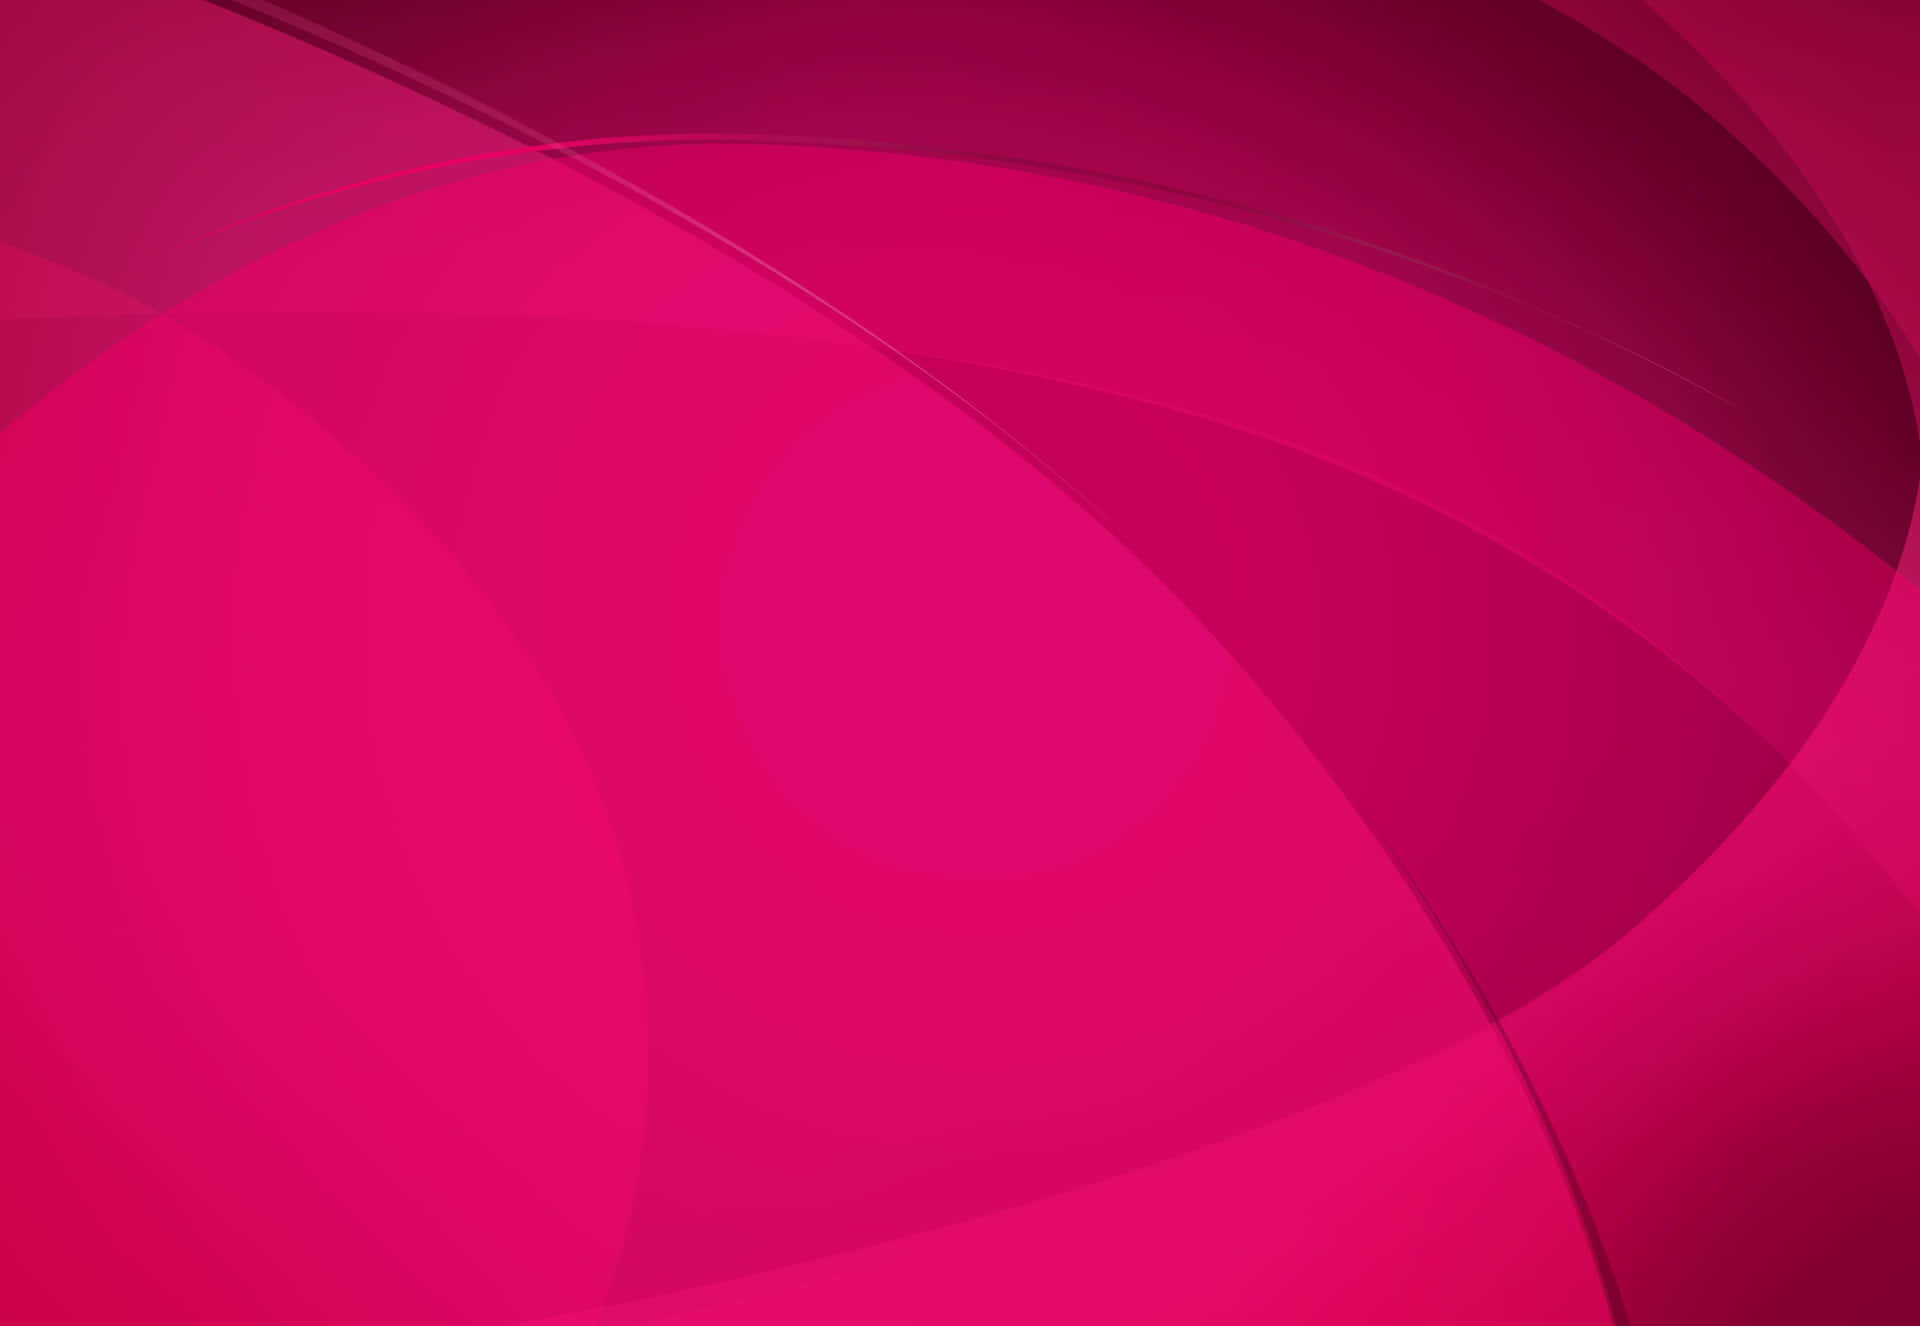 Solid Plain Pink Background